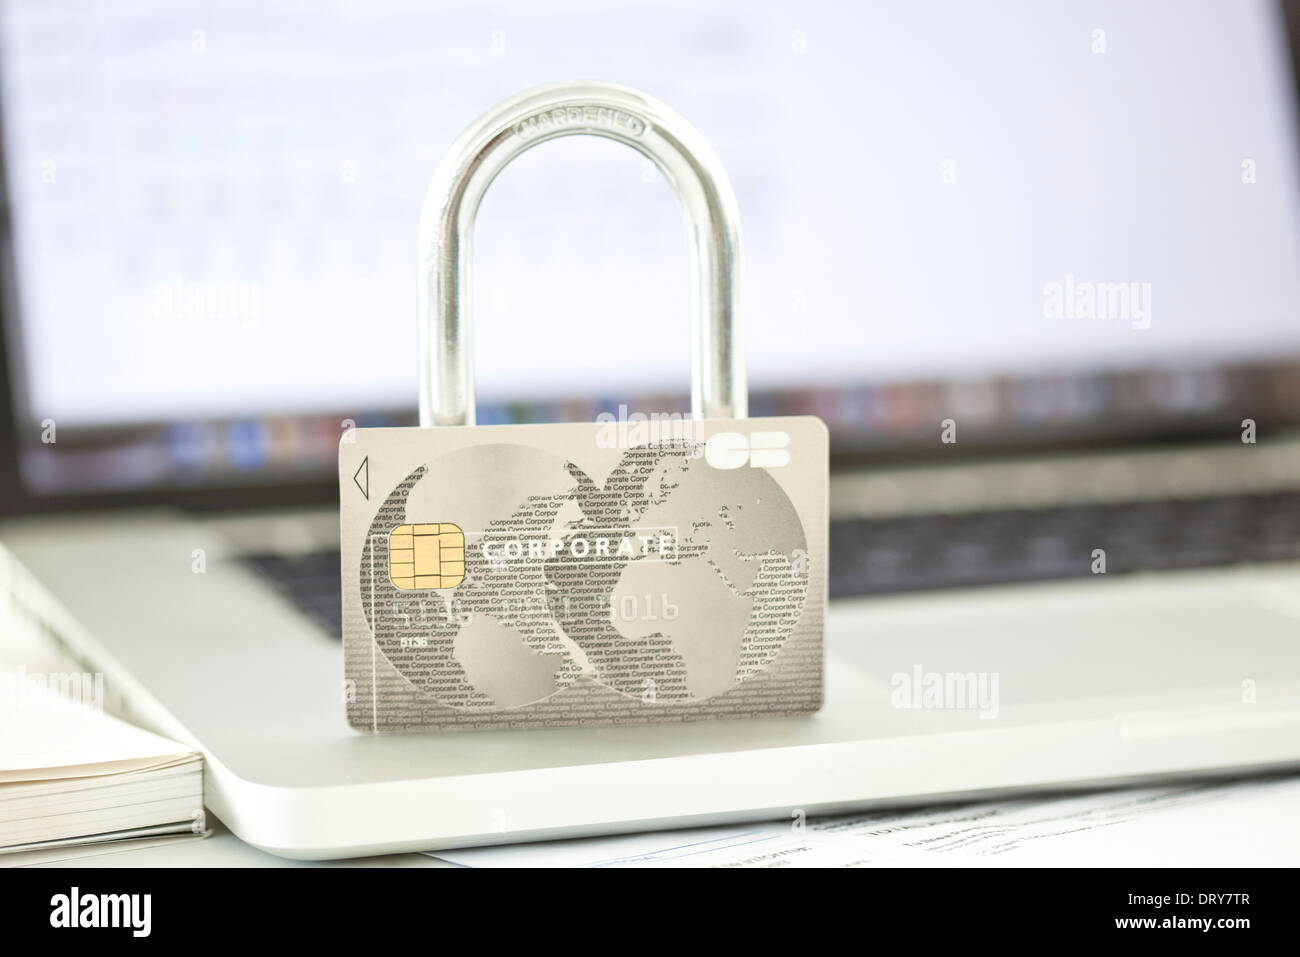 Credit card and lock resting on top of laptop computer representing internet security Stock Photo